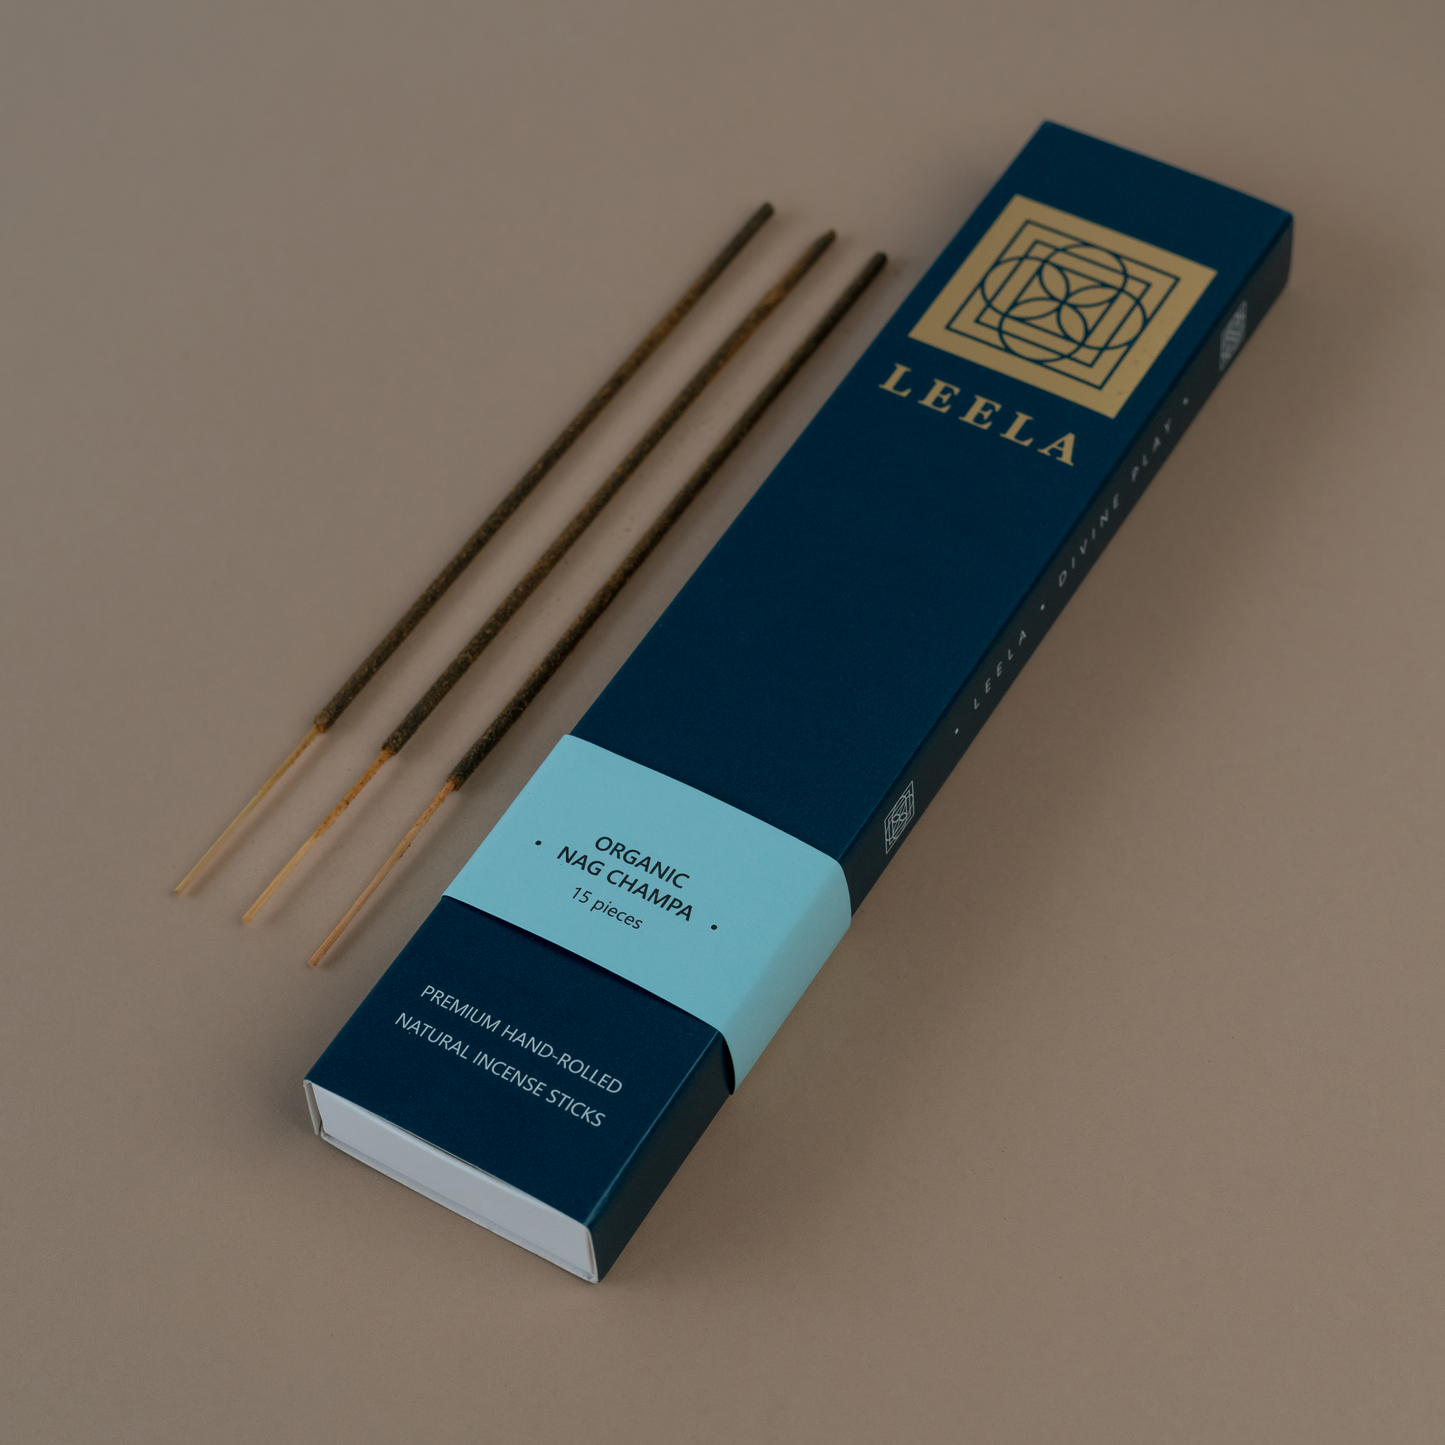 Organic Nag champa incense from Leela divine play. Natural hand-rolled incense from India